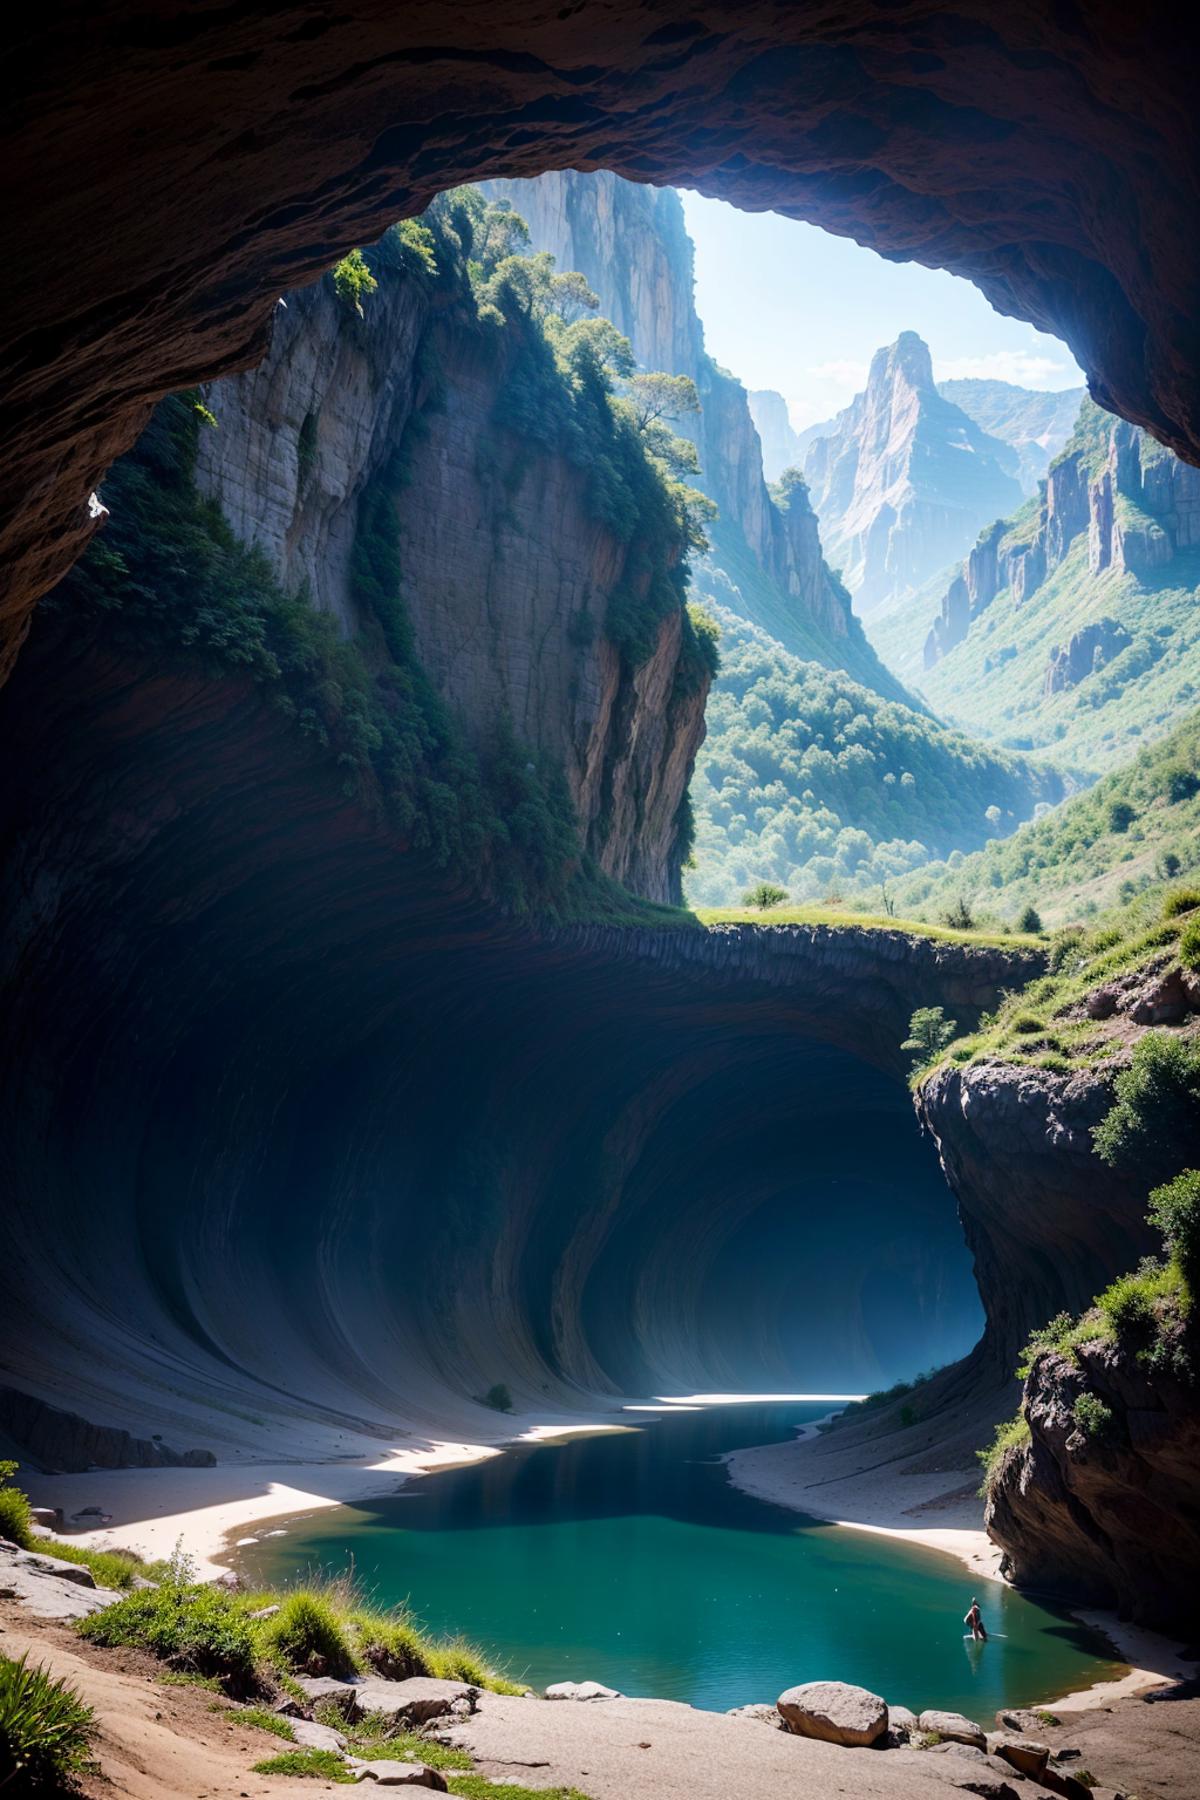 A large, dark cave in the mountains with a stream of water flowing through it.